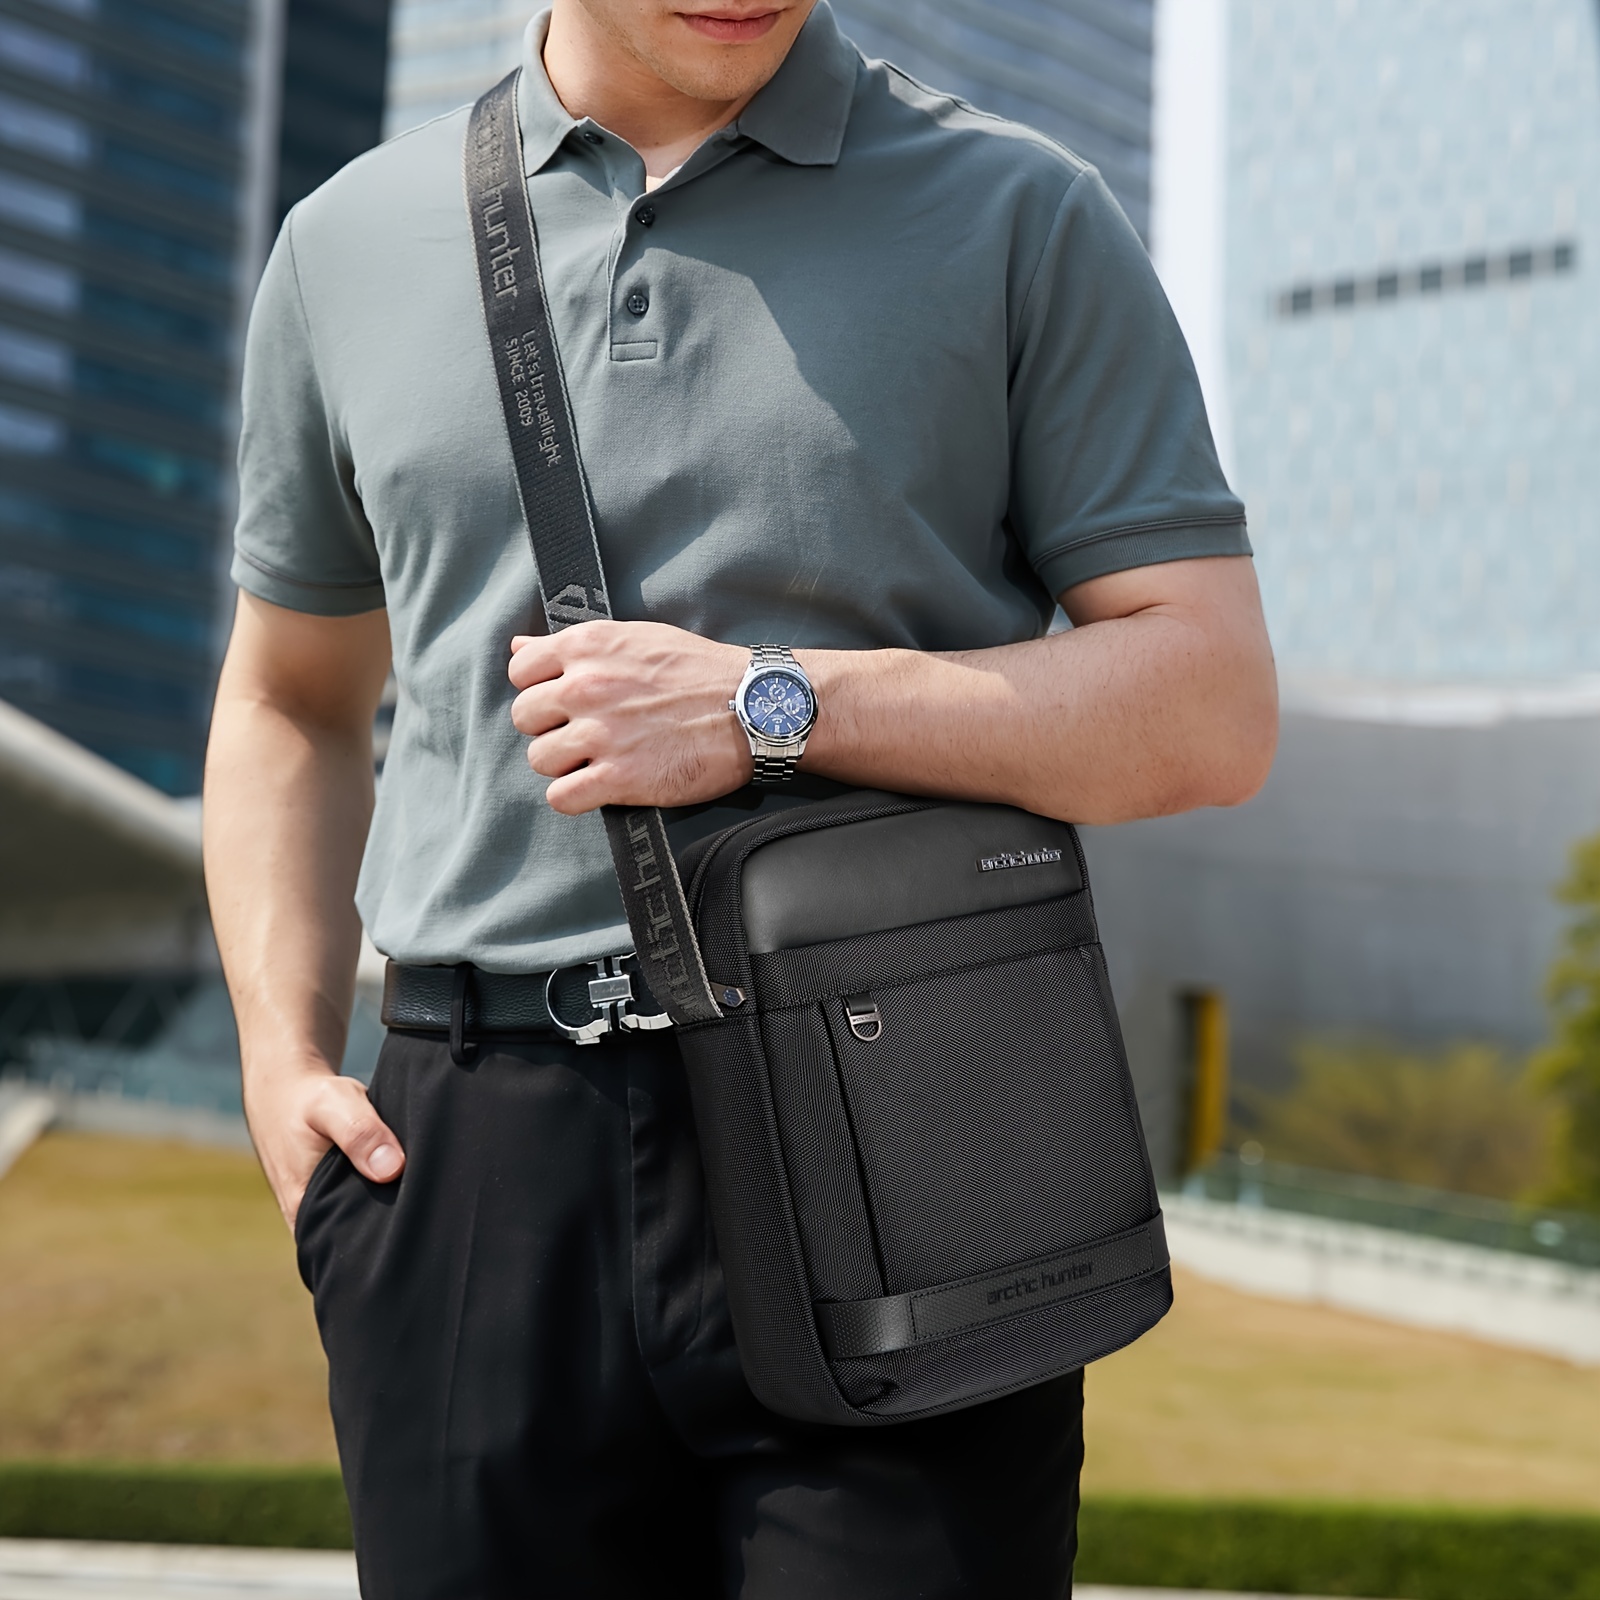 Men's New Fashion Casual Business Shoulder Bags Travel Sports Outdoor  Messenger Bag Crossbody Sling Hanging Bags Pack For Male